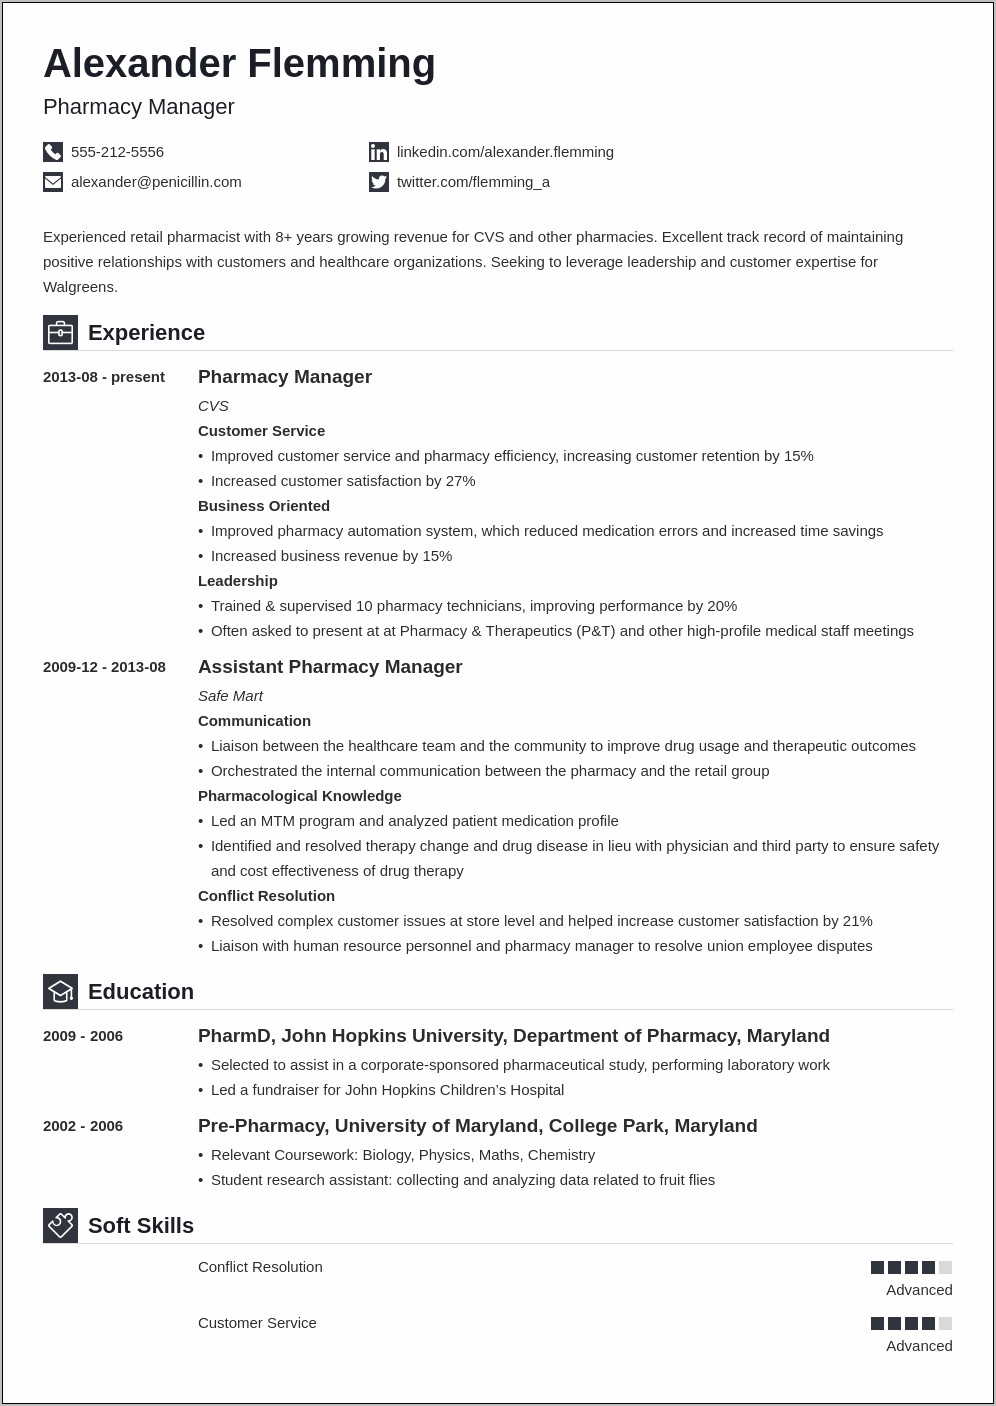 Example Of Chronological Resume For Fundraiser Professional